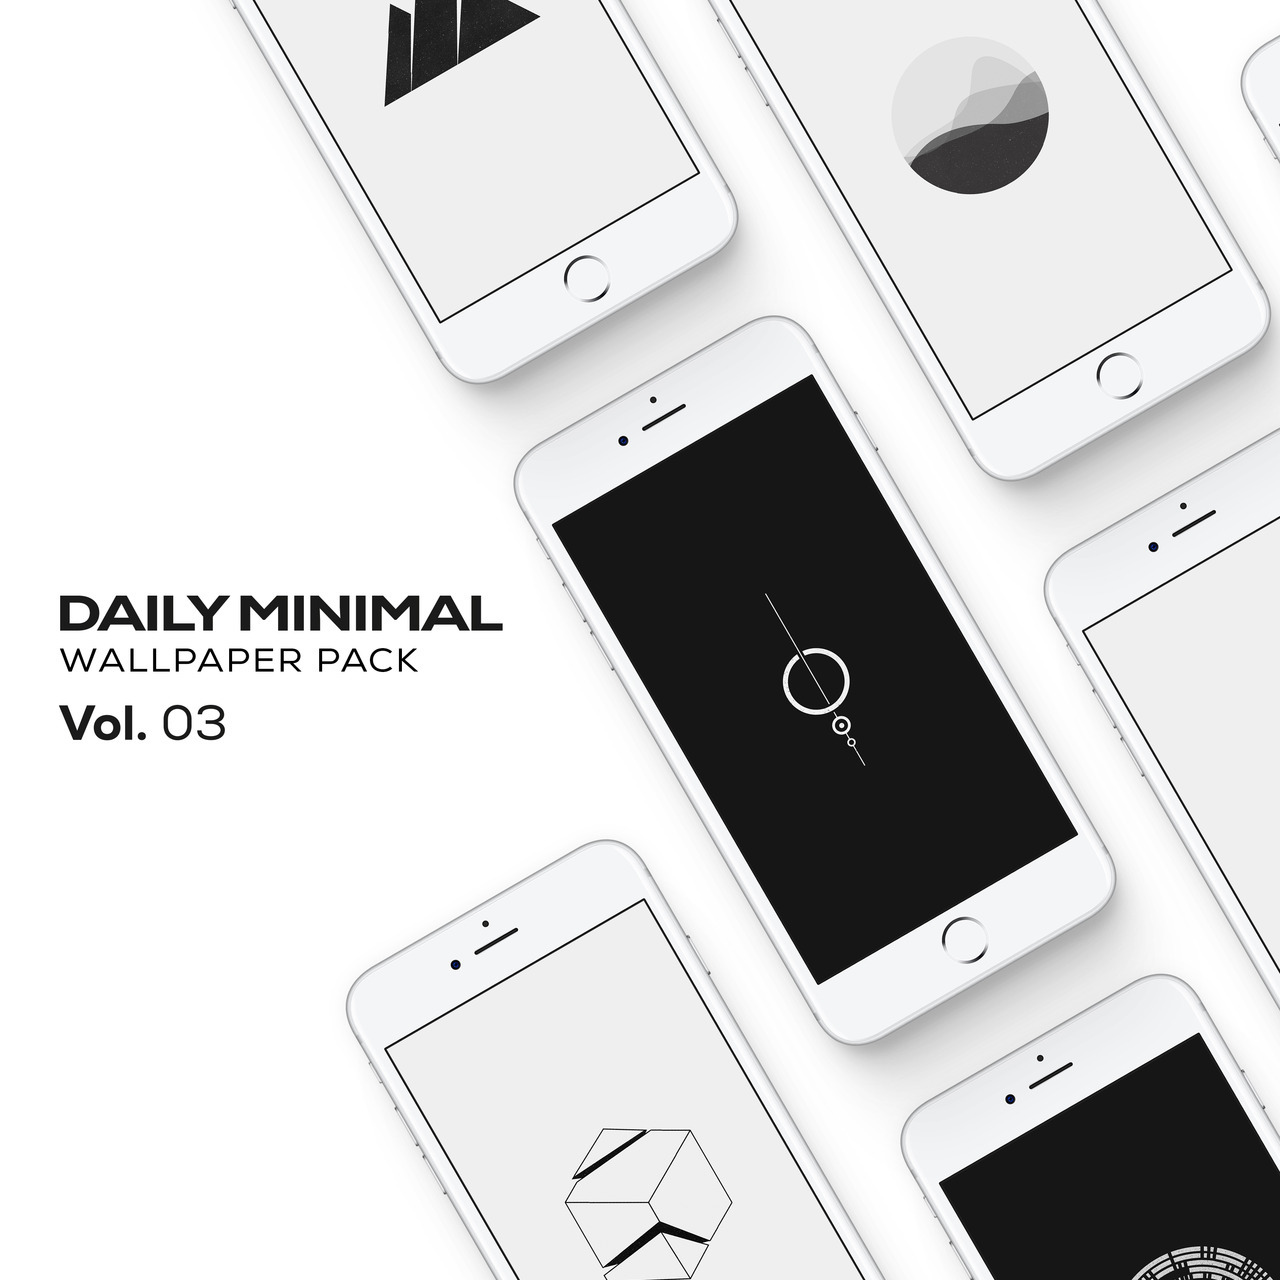 Get This All New Wallpaper Pack Which Contains A Selection - Smartphone - HD Wallpaper 